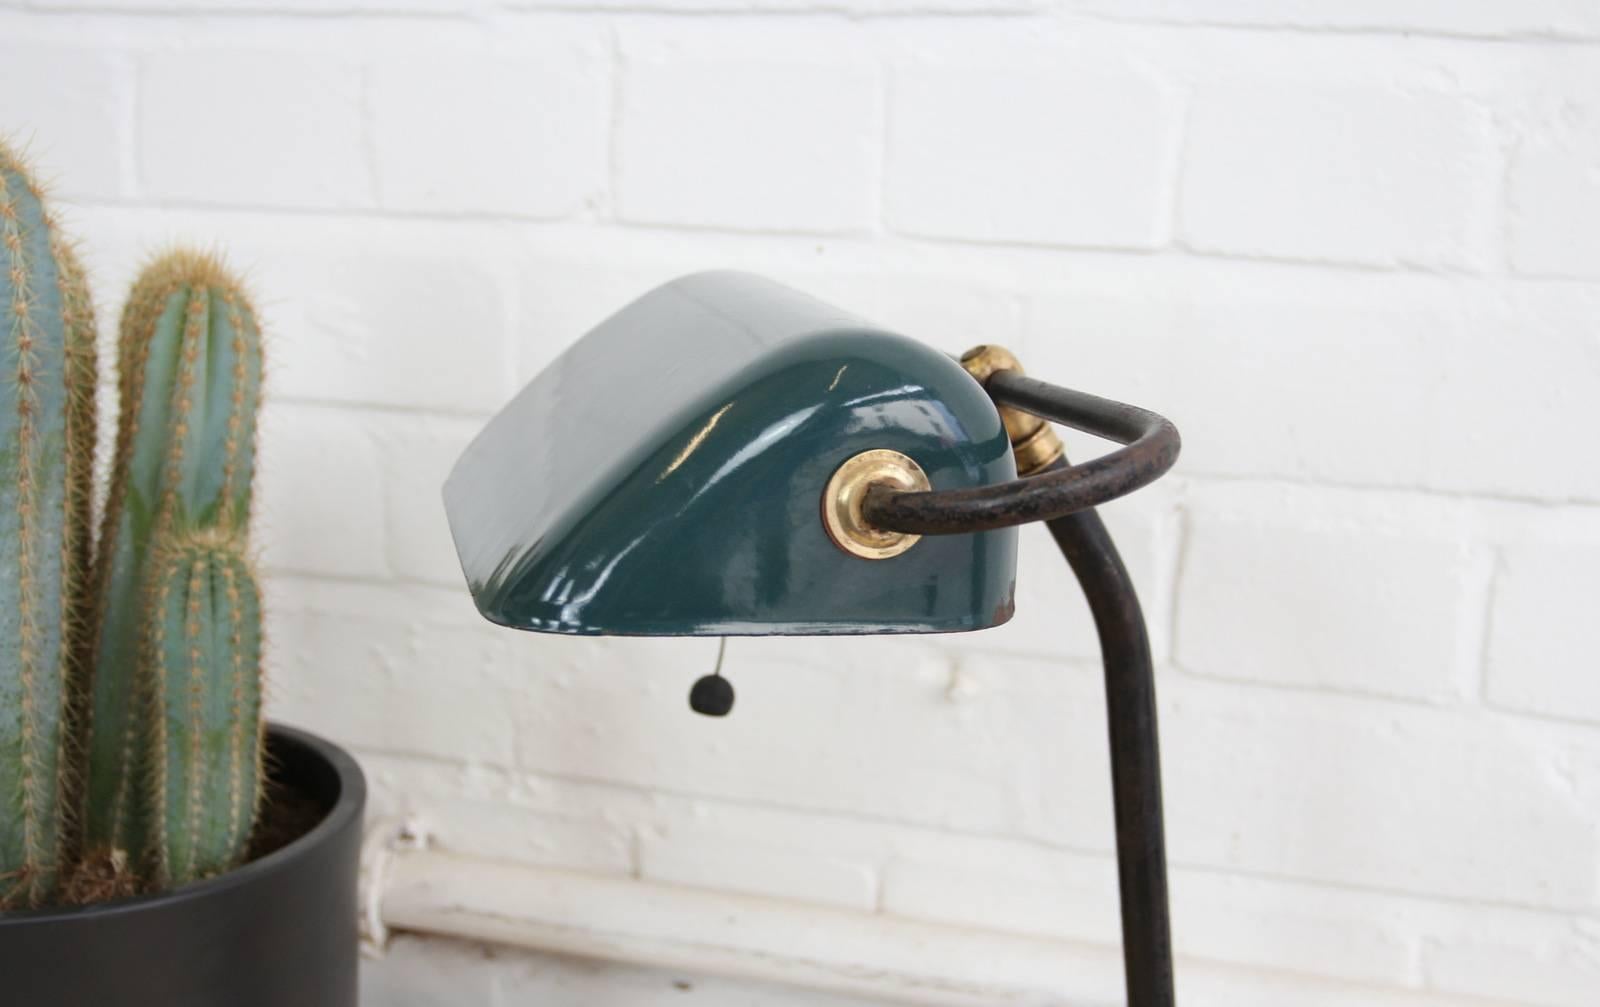 Bankers desk lamp by Gebruder Jacob, circa 1920s

- Cast iron base
- Vitreous green enamel shade
- Original pull cord on or off switch
- Takes E27 fitting bulbs
- German, circa 1920s
- Measures: 40cm tall x 31cm wide x 21cm deep

Condition